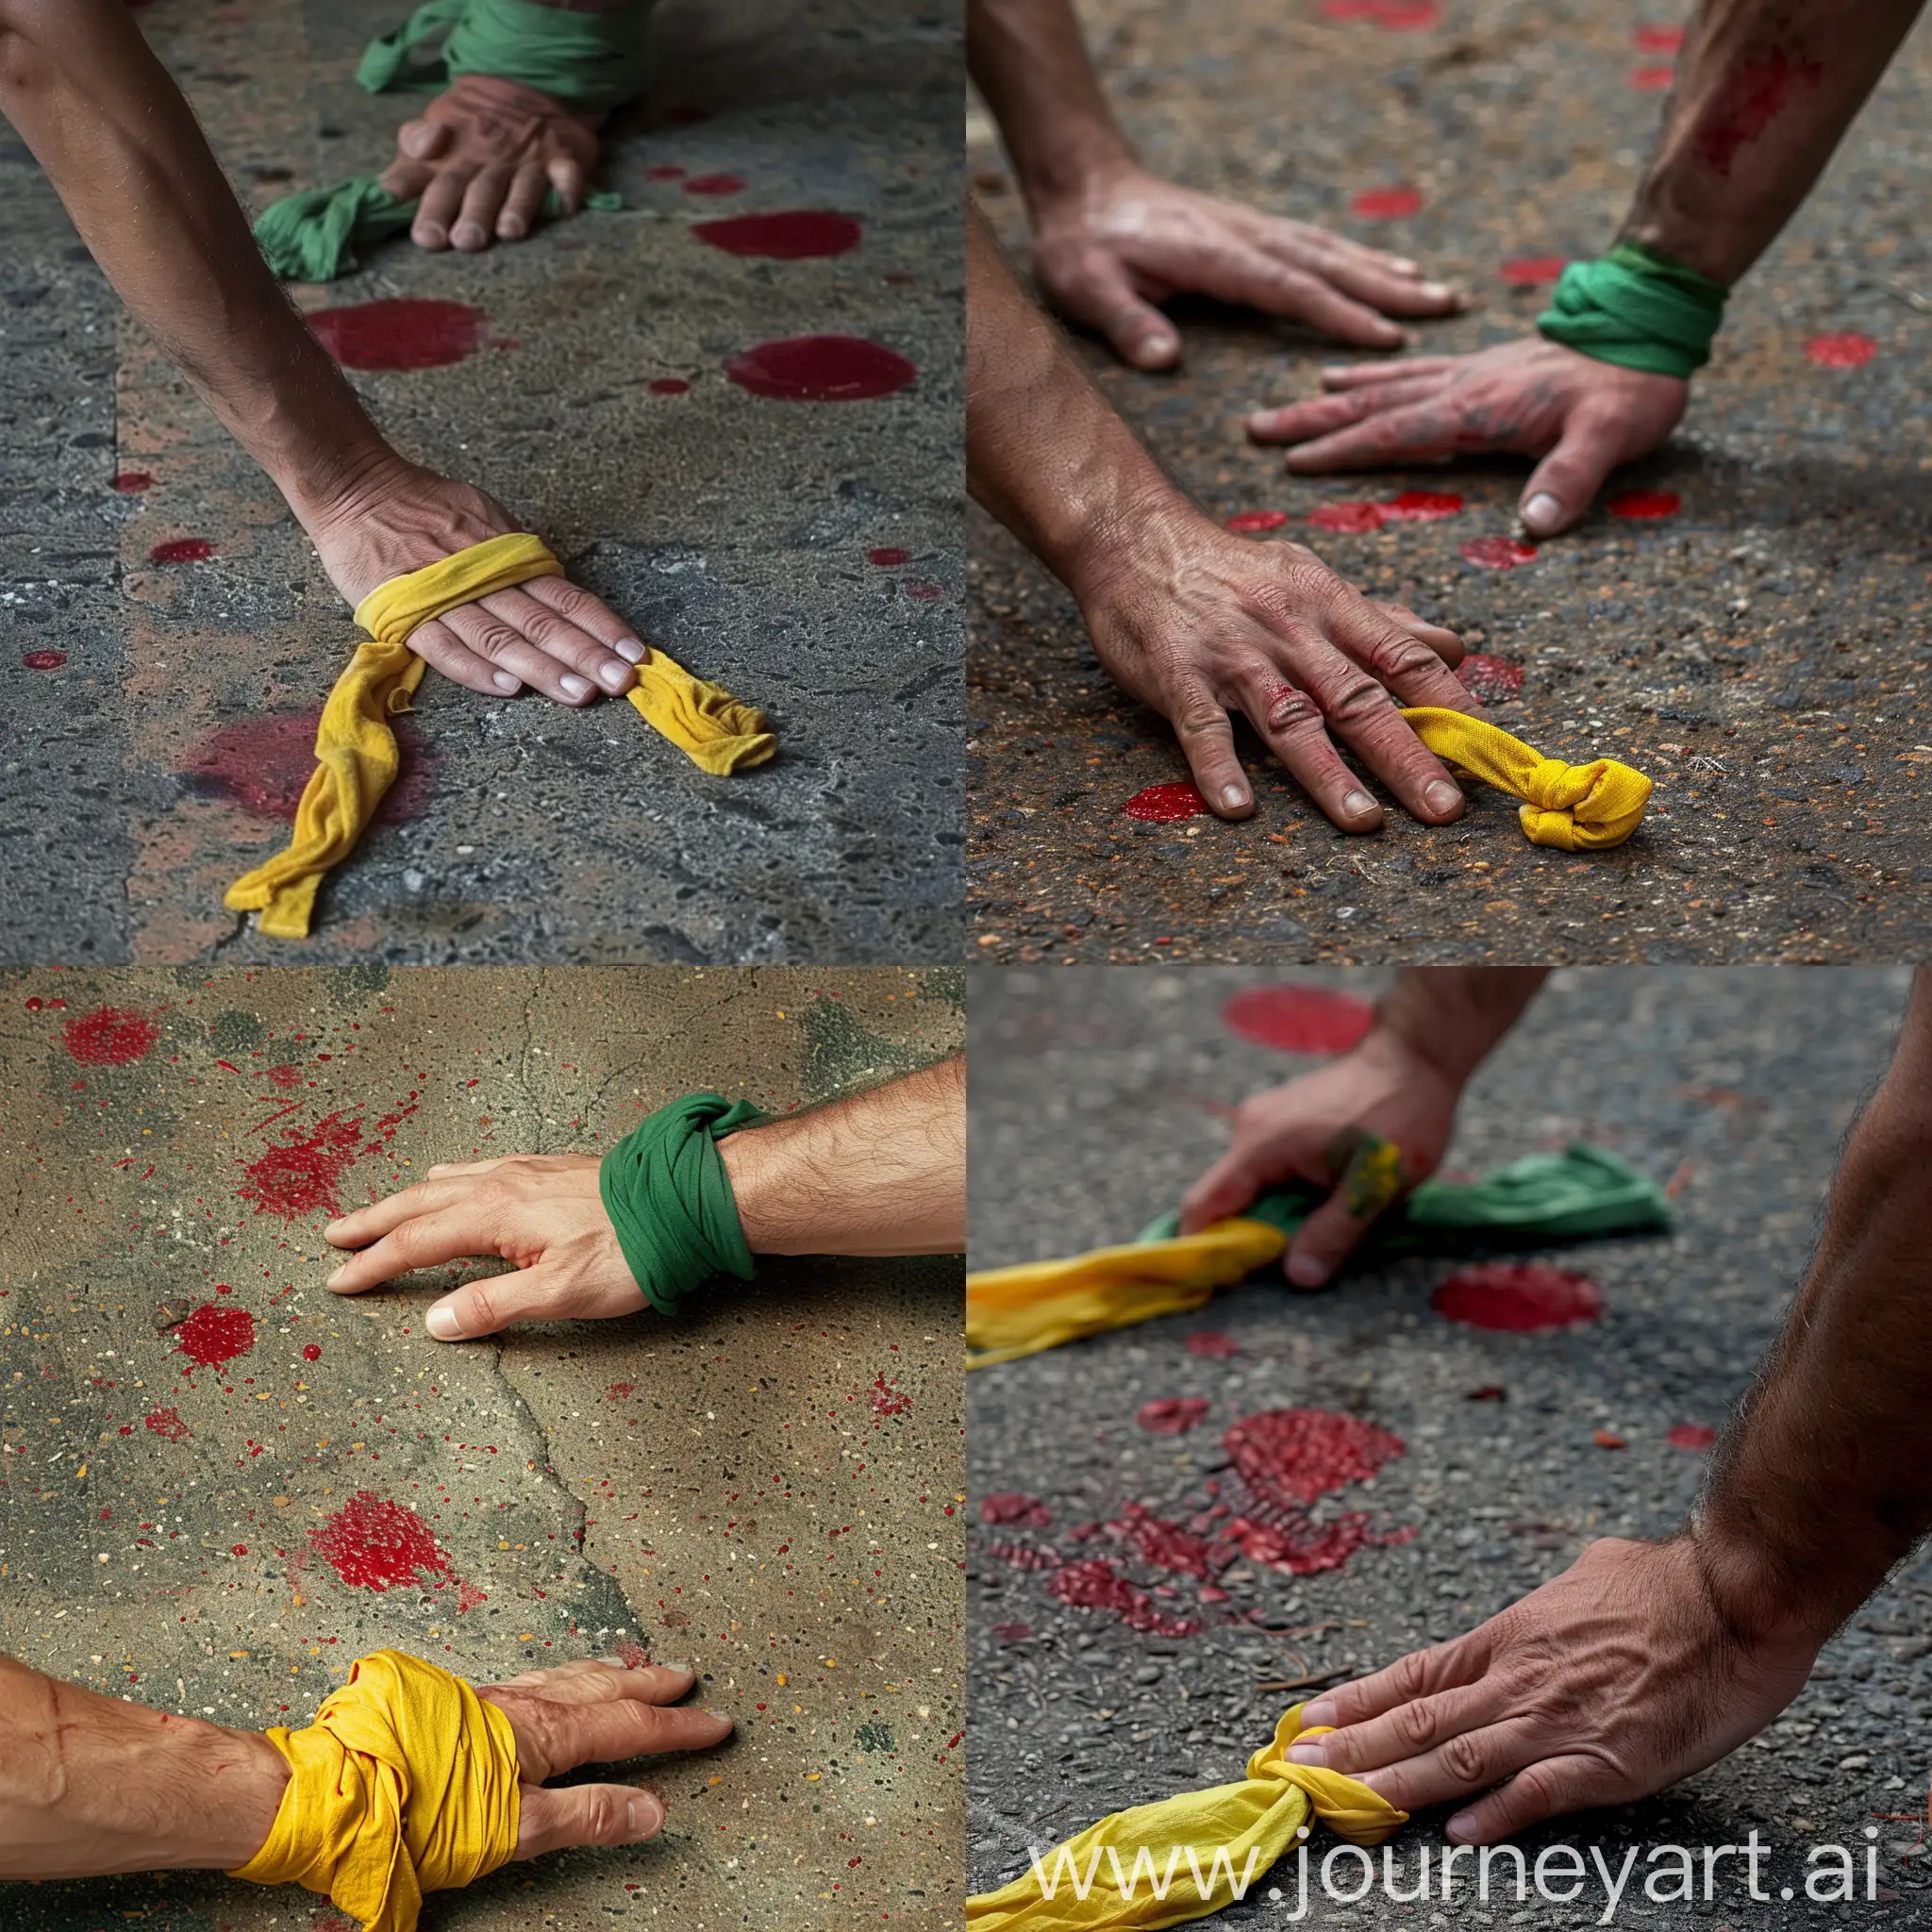 Two-Mens-Hands-with-Colored-Cloth-Bands-on-Asbestos-Floor-with-Red-Spots